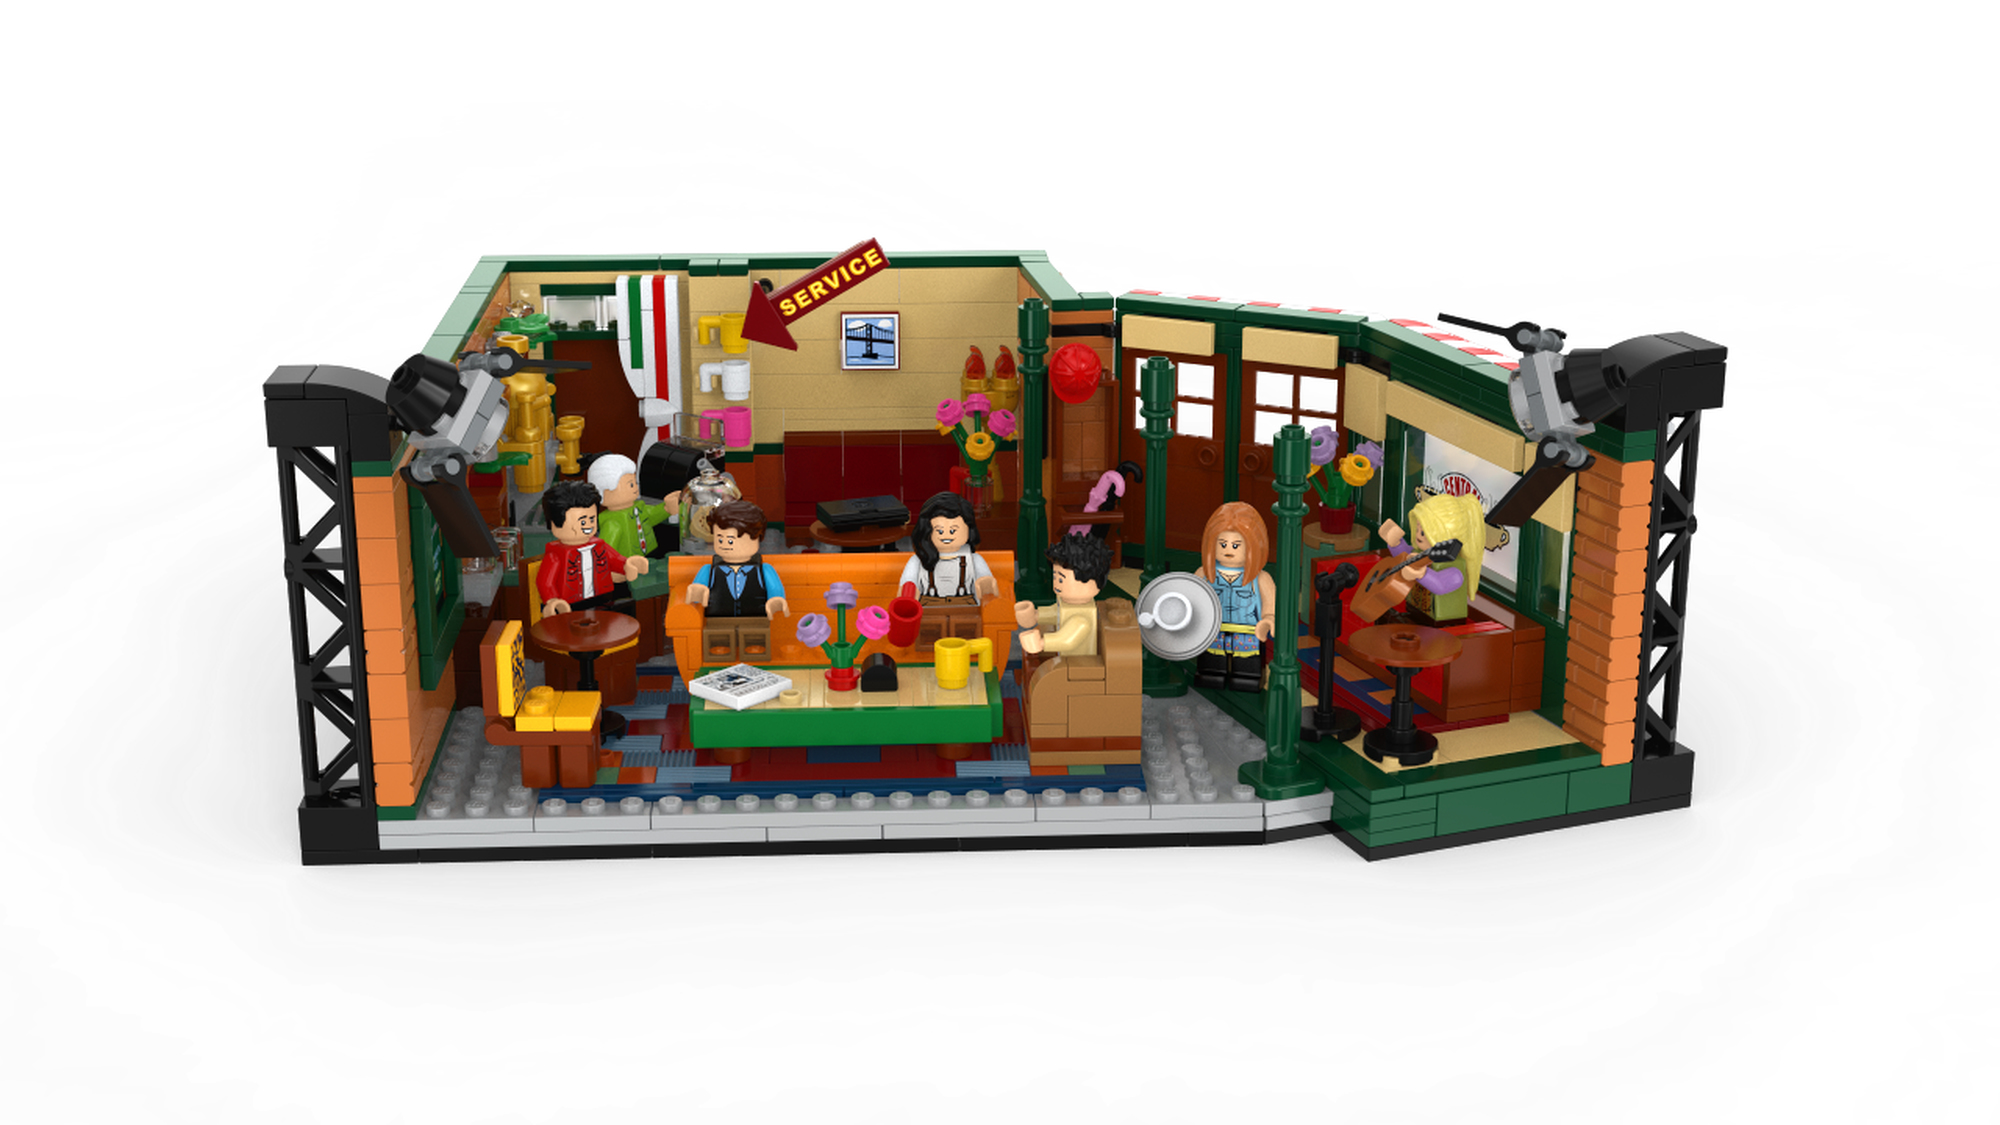 LEGO 21319 The Central Perk Coffee of Friends, 5702016603842